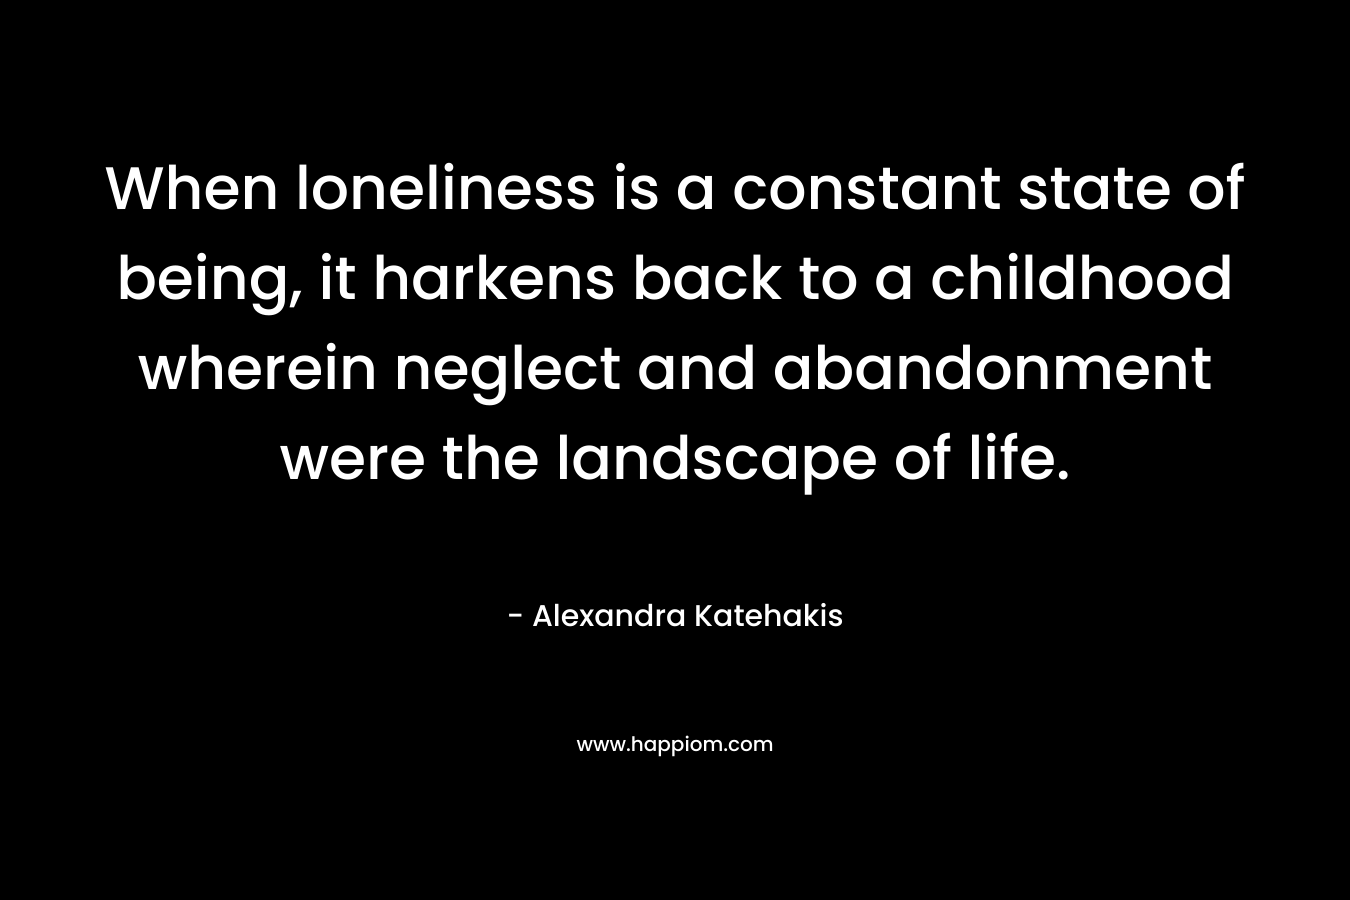 When loneliness is a constant state of being, it harkens back to a childhood wherein neglect and abandonment were the landscape of life.